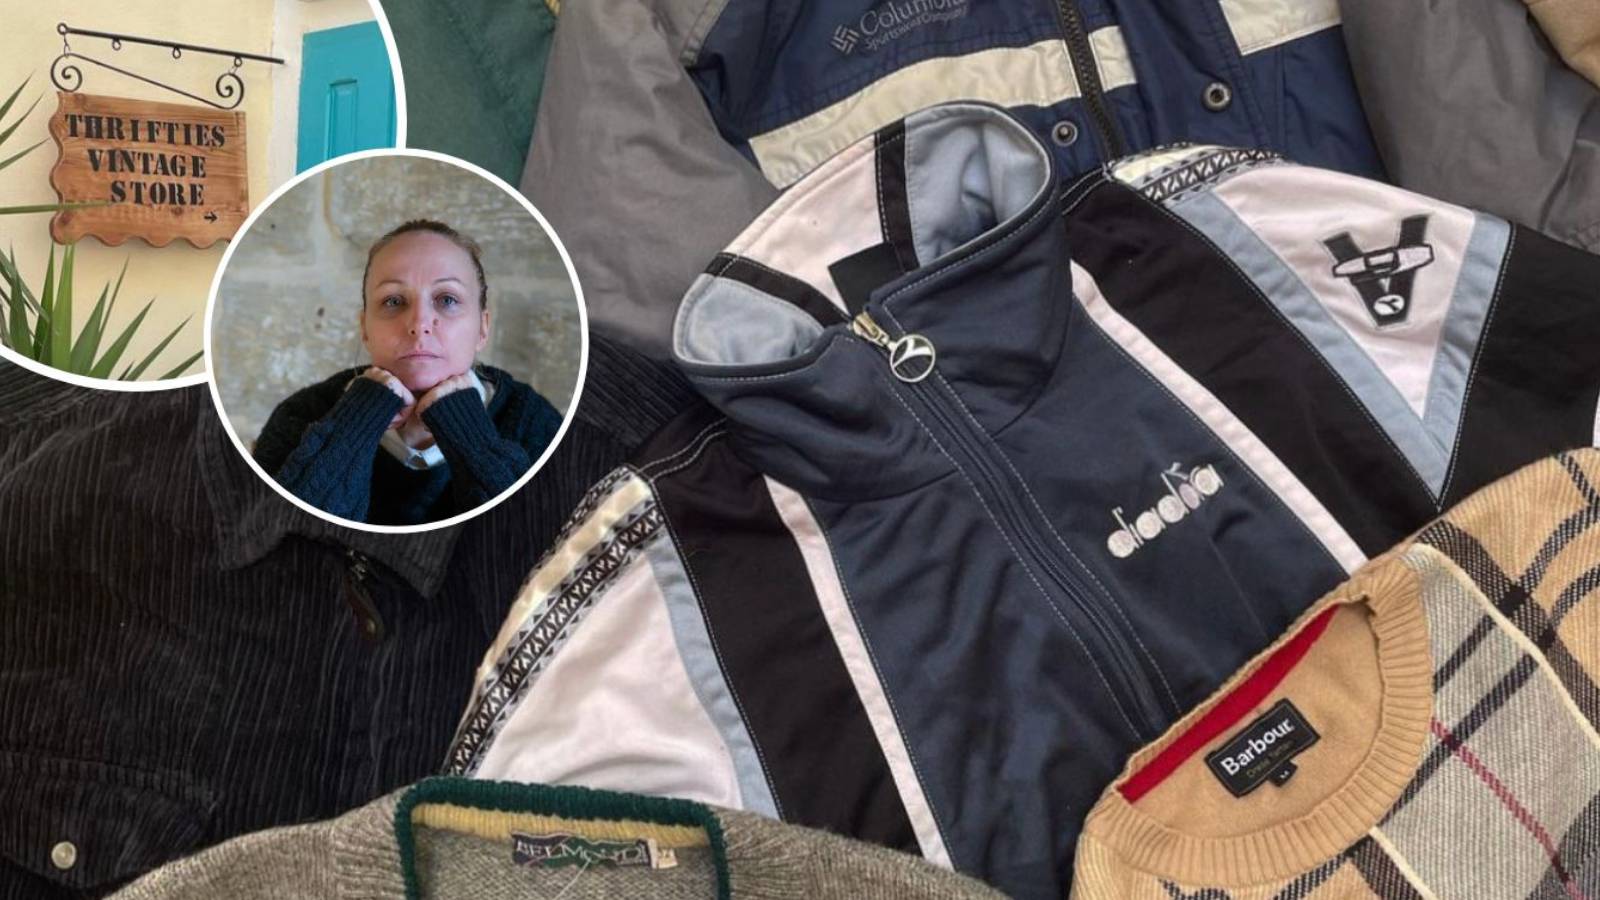 Extreme 'hustling' trend upsets Victoria secondhand clothing